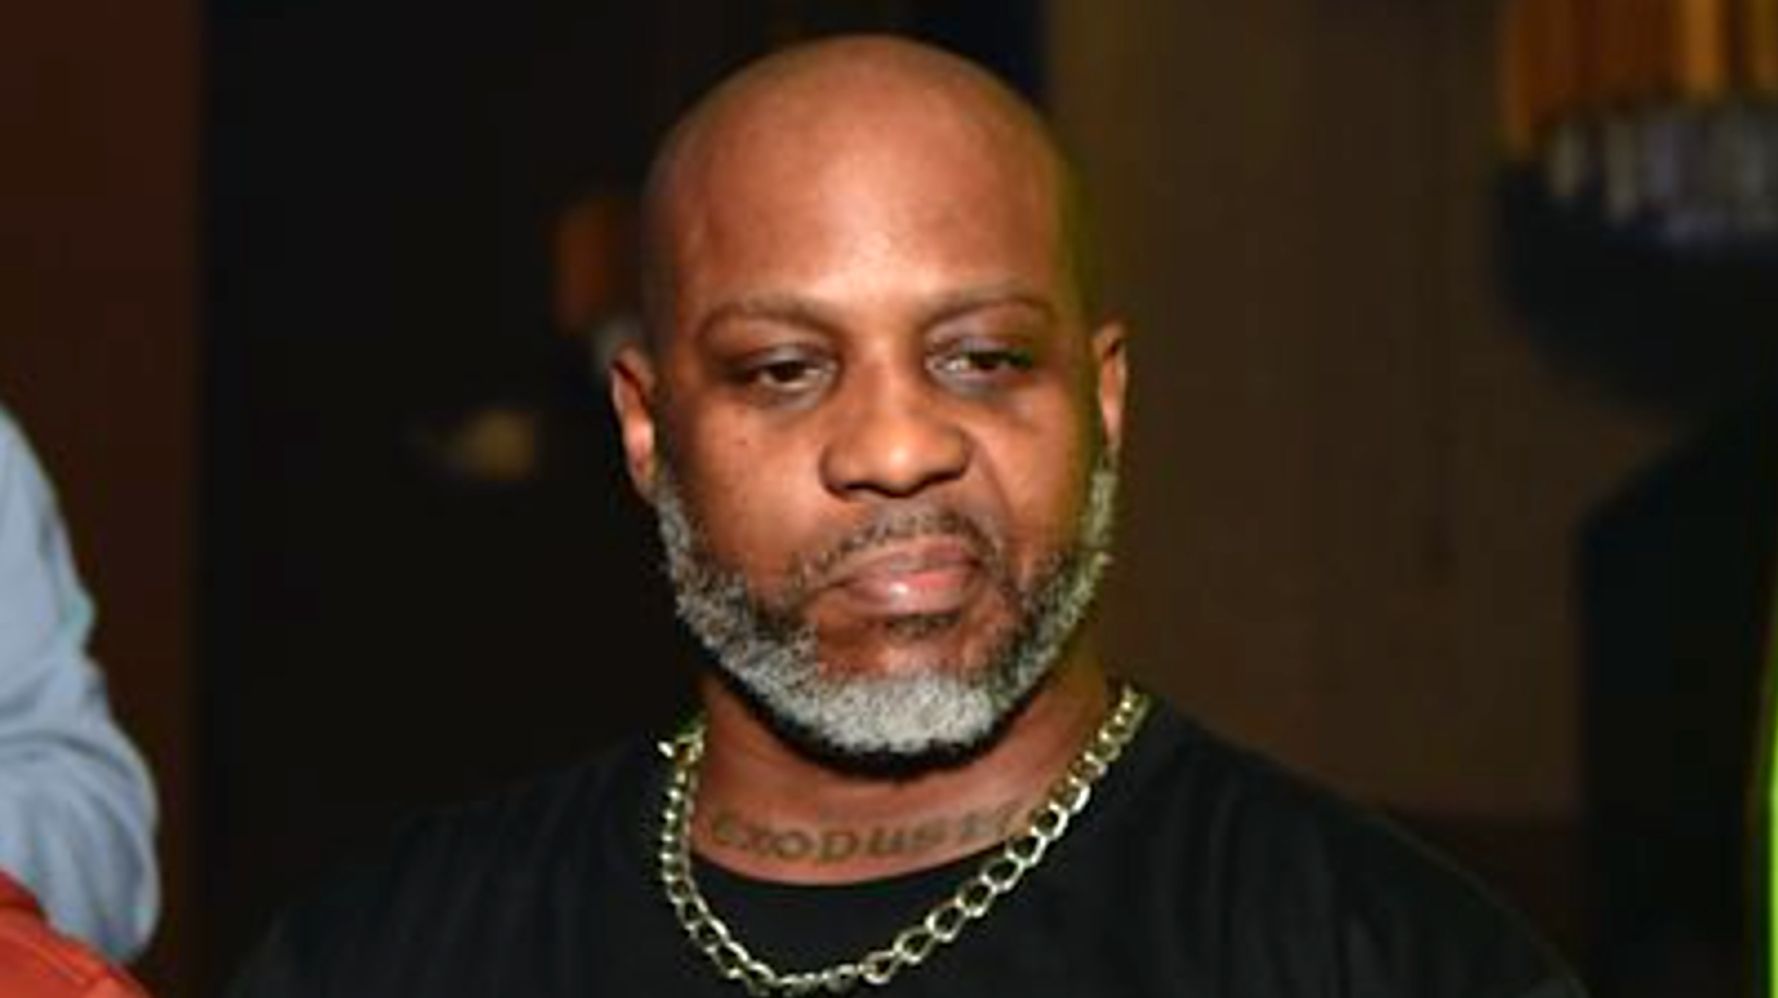 DMX Leaves Behind An Unexpected 'Fun Fact' About Himself ...